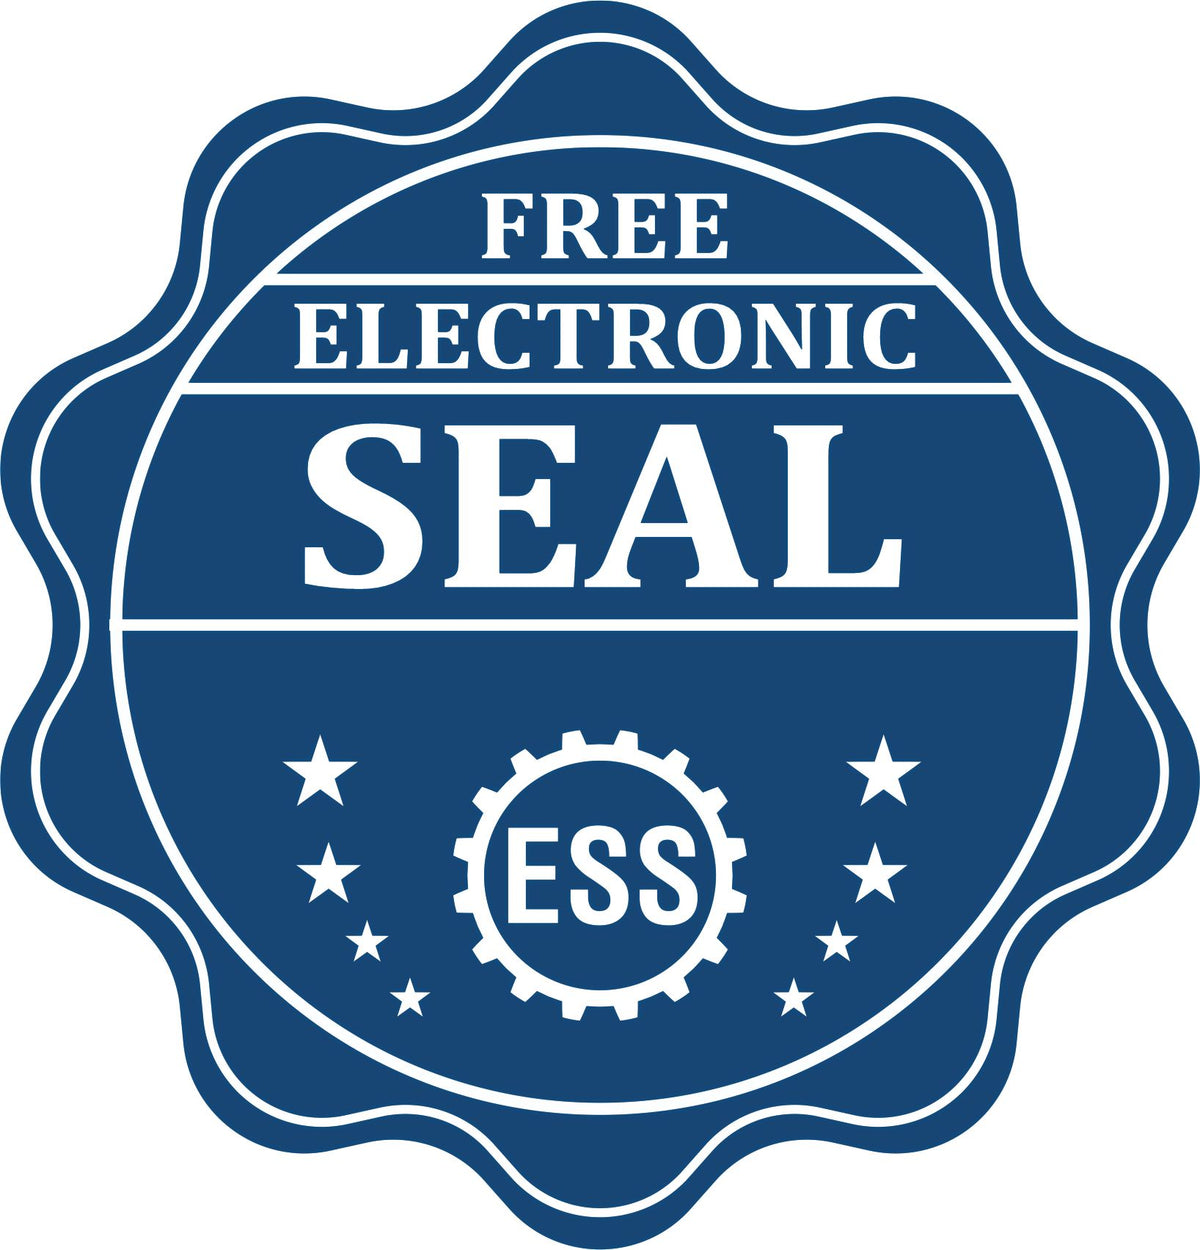 A badge showing a free electronic seal for the Slim Pre-Inked Alaska Professional Engineer Seal Stamp with stars and the ESS gear on the emblem.